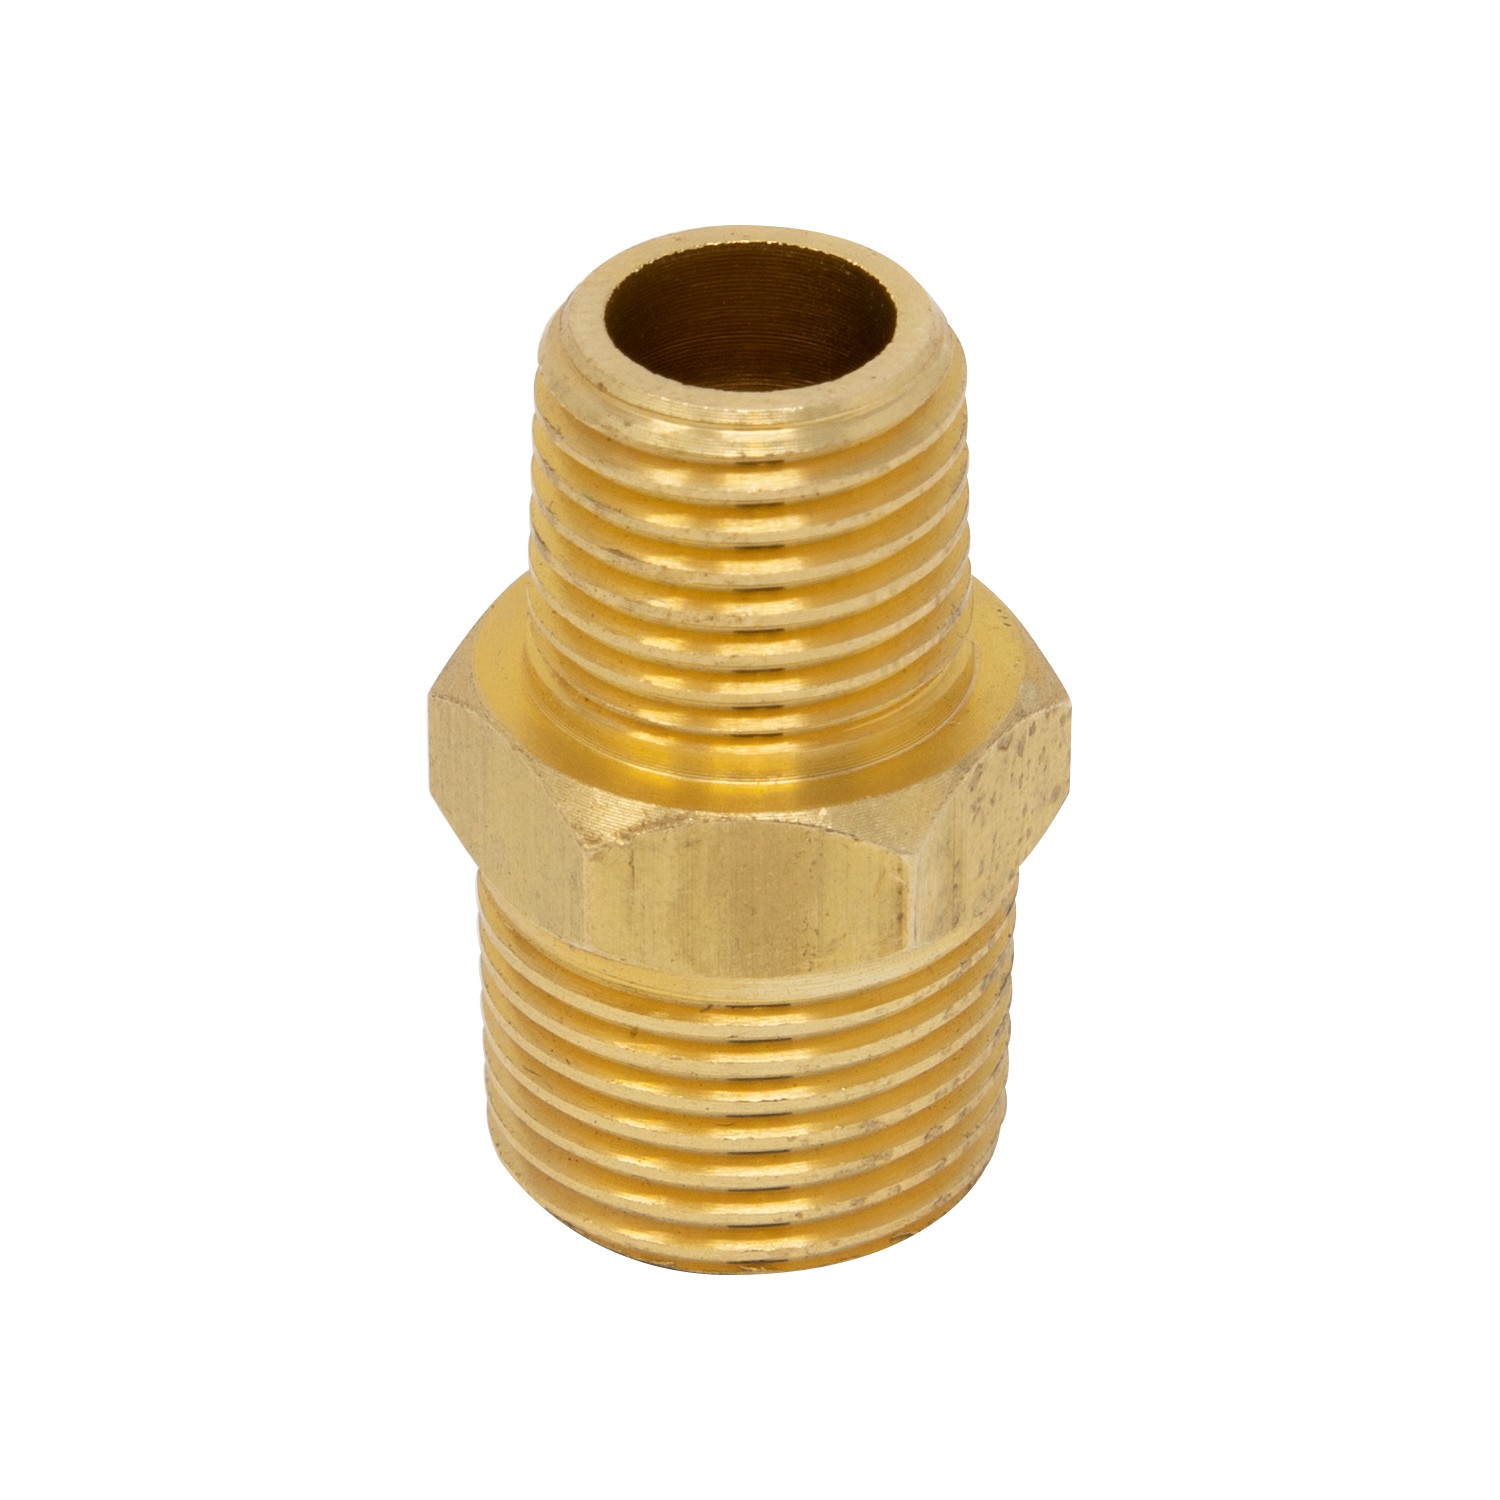 Male Pipe Reducer - 1/2" x 1/4"